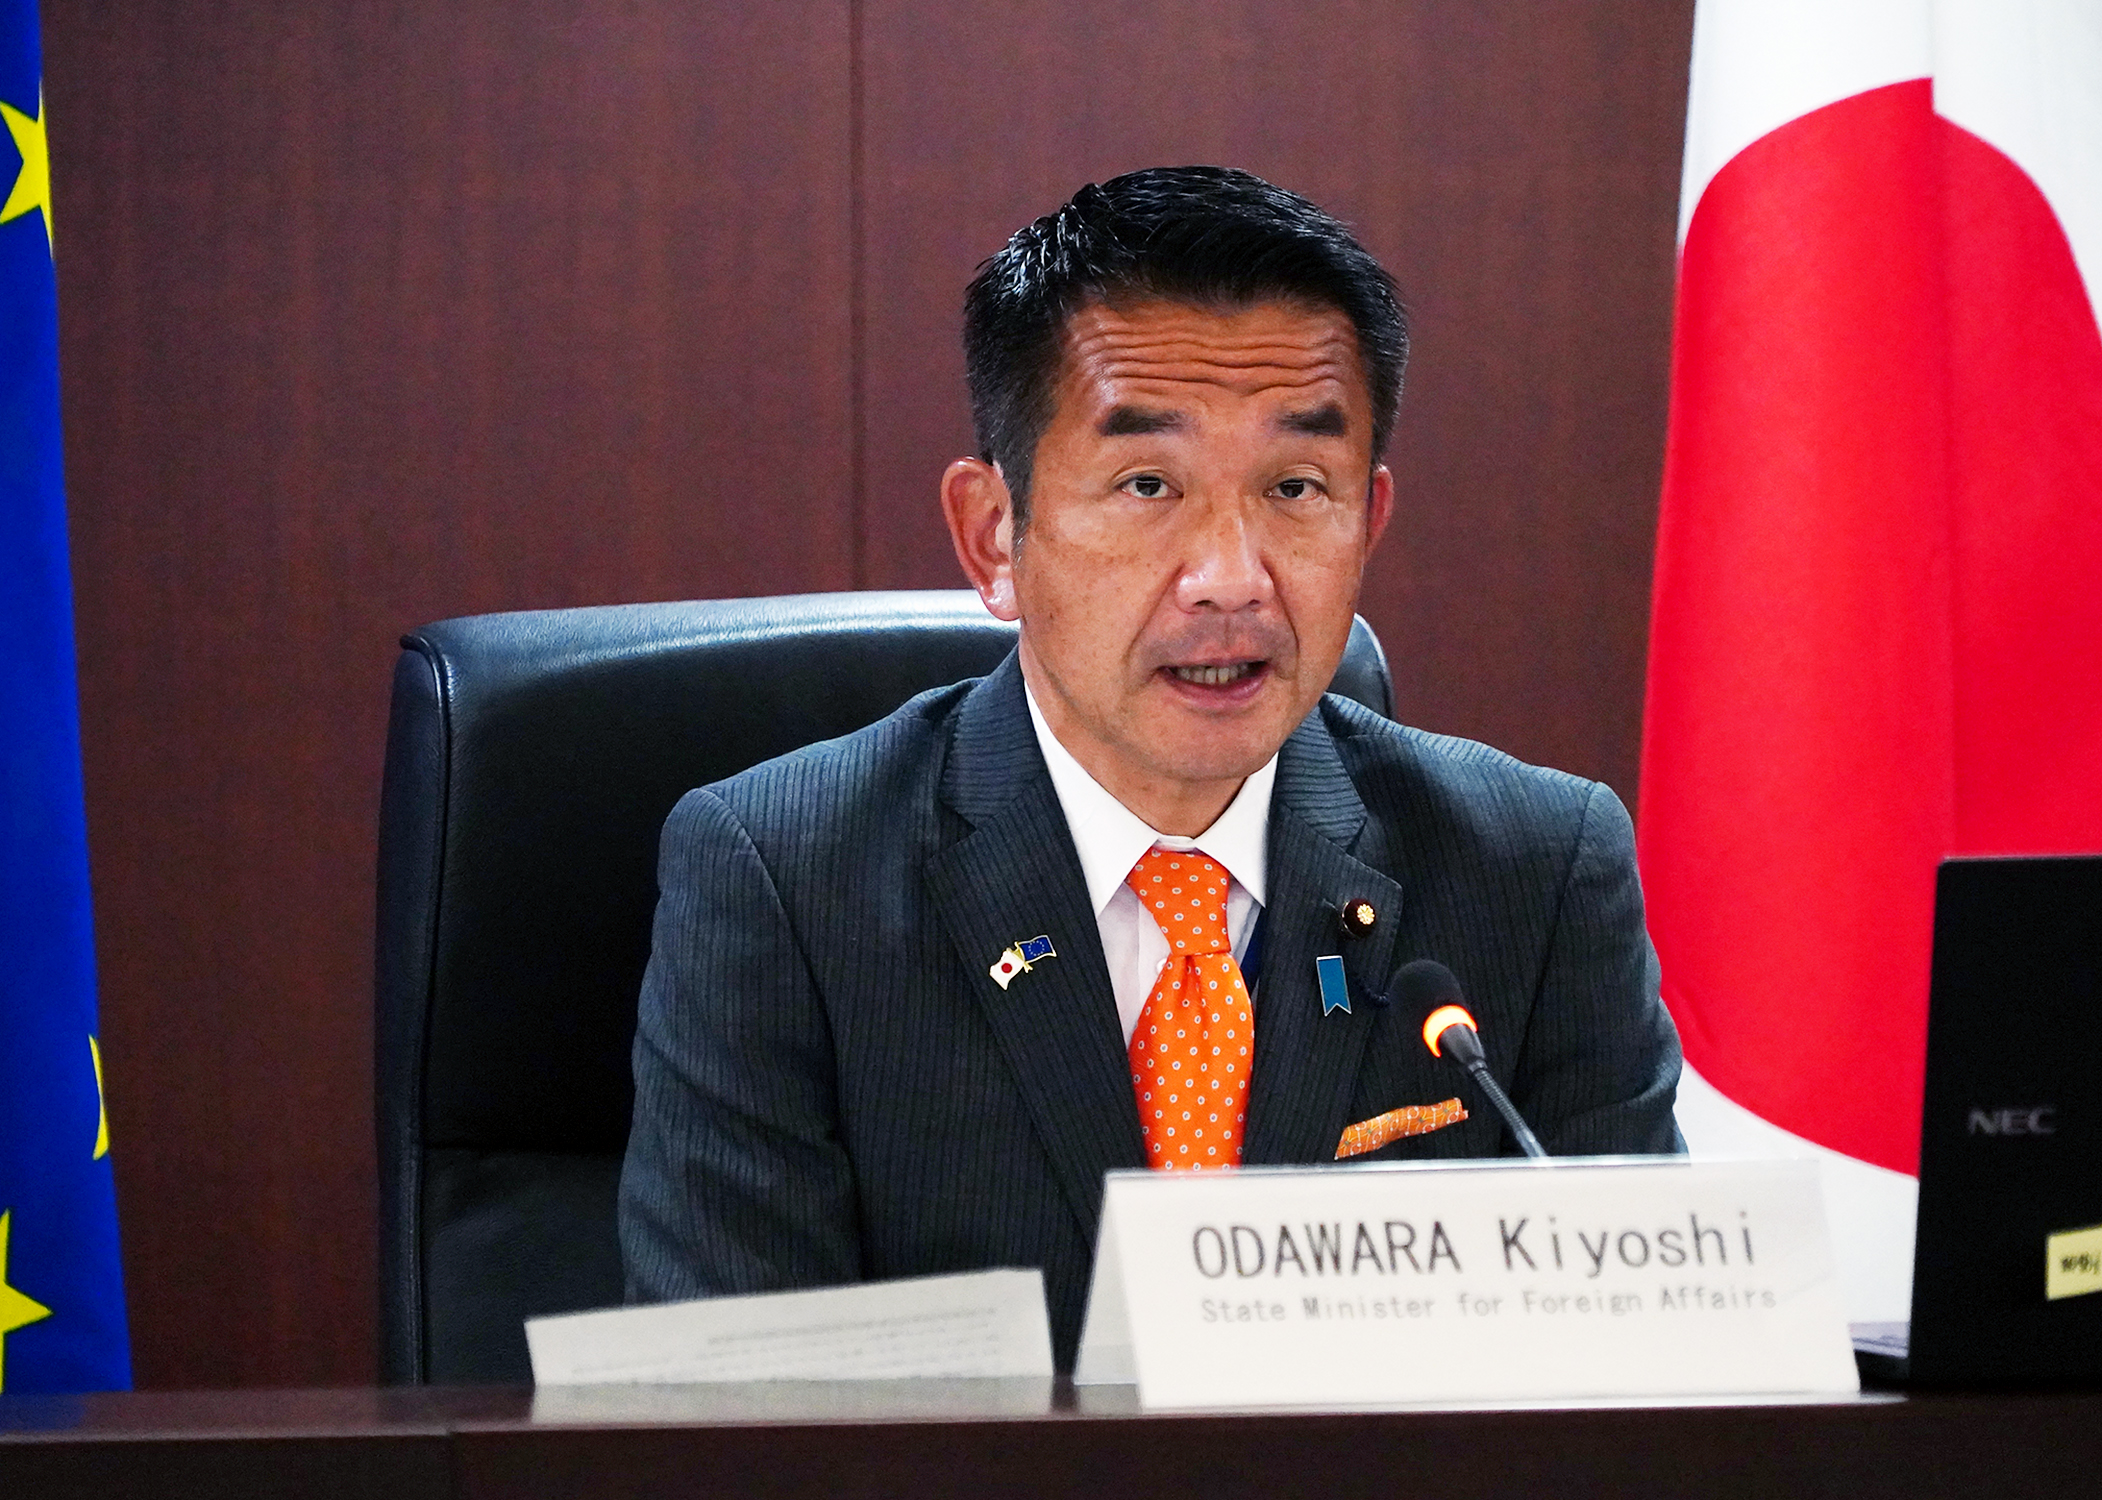 MOFA State Minister Odawara during the handover session © Ministry of Foreign Affairs